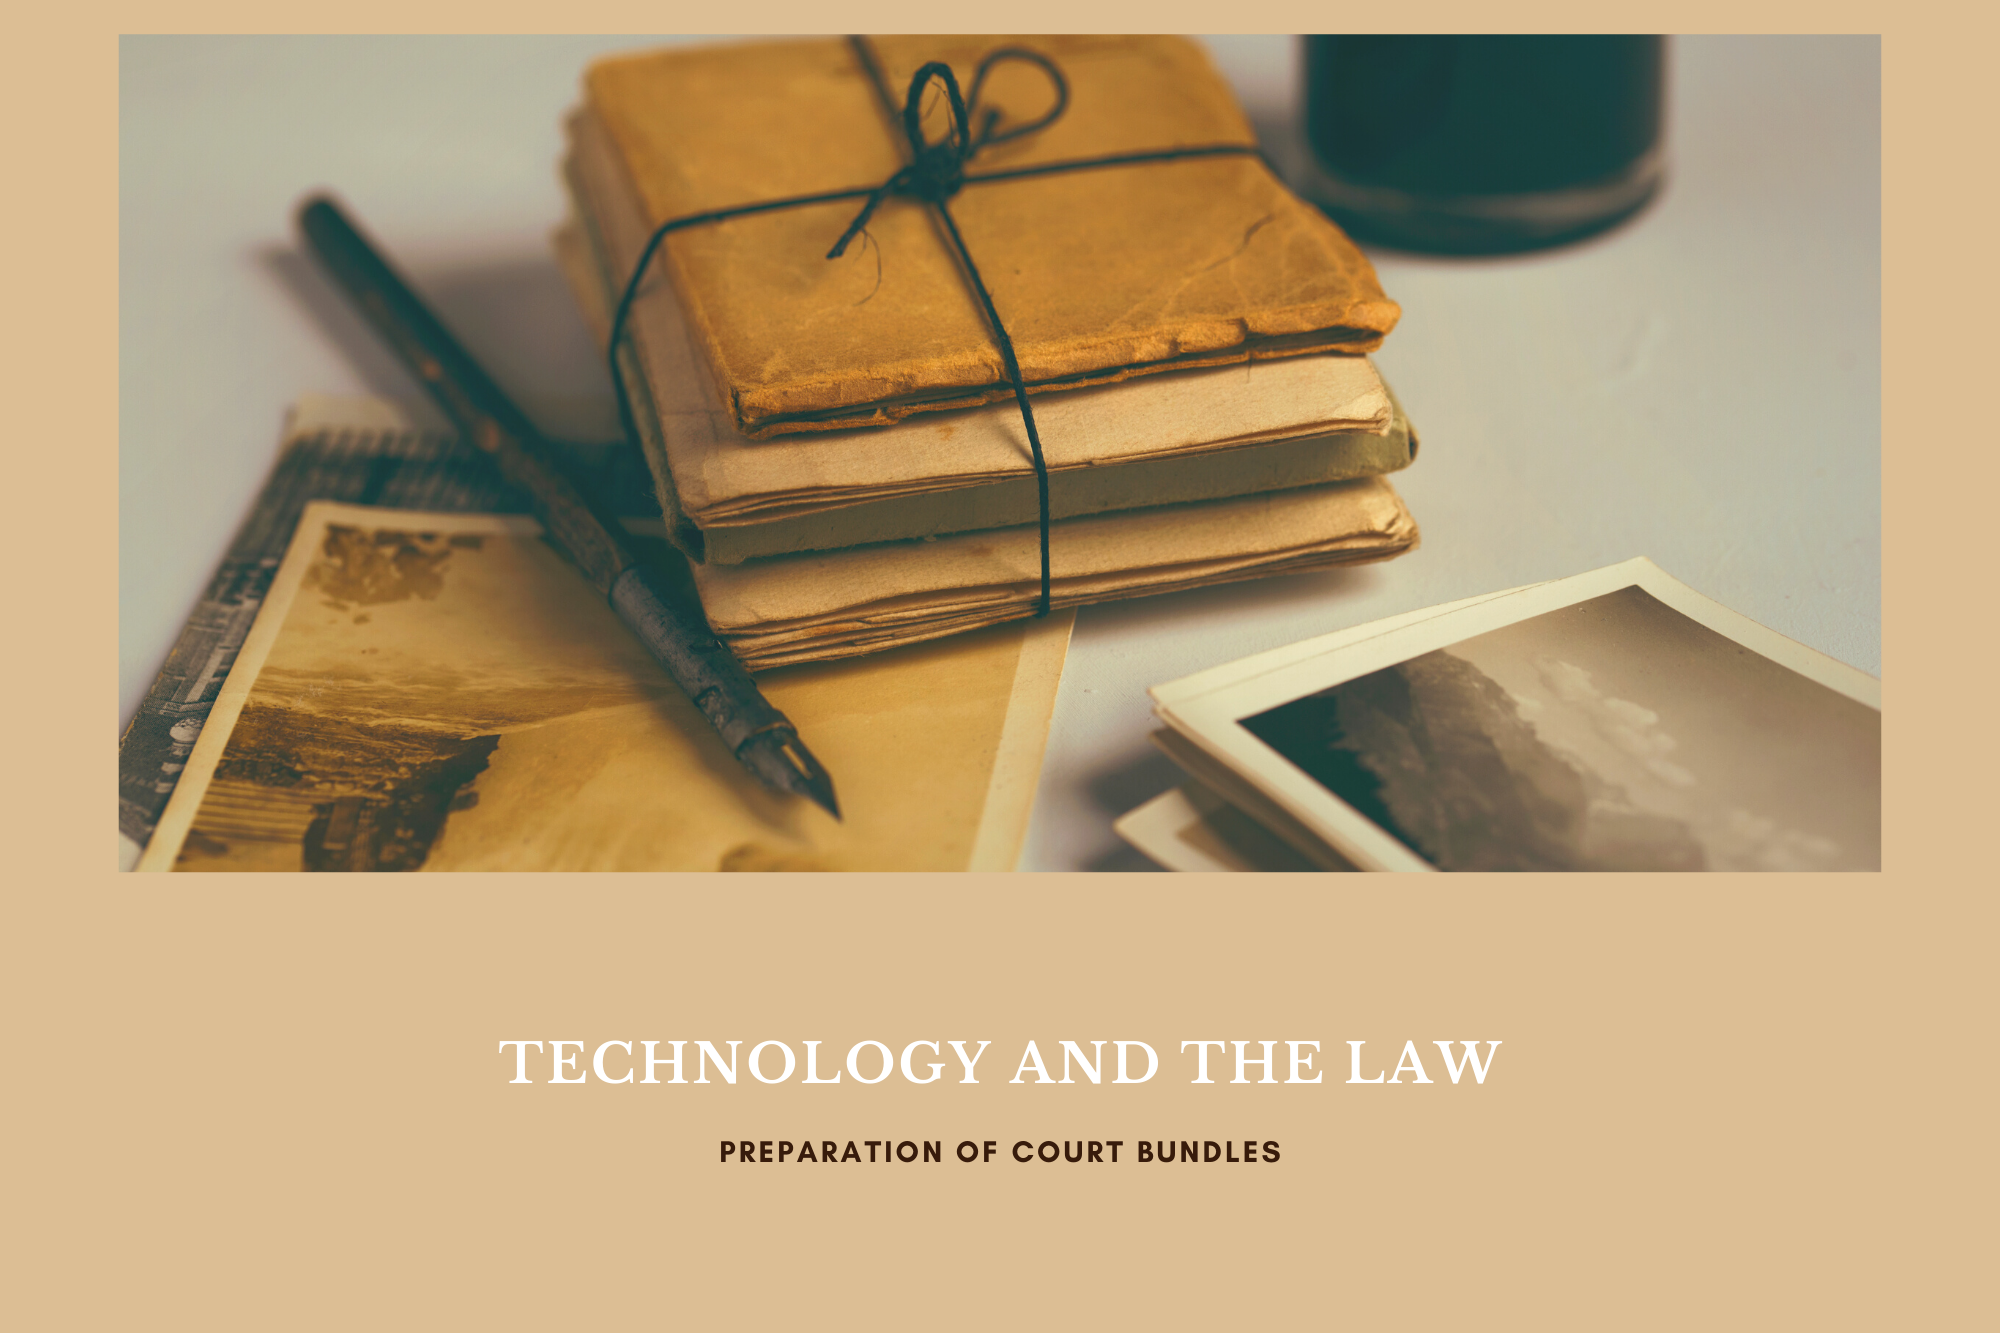 Technology can help to prepare court documents